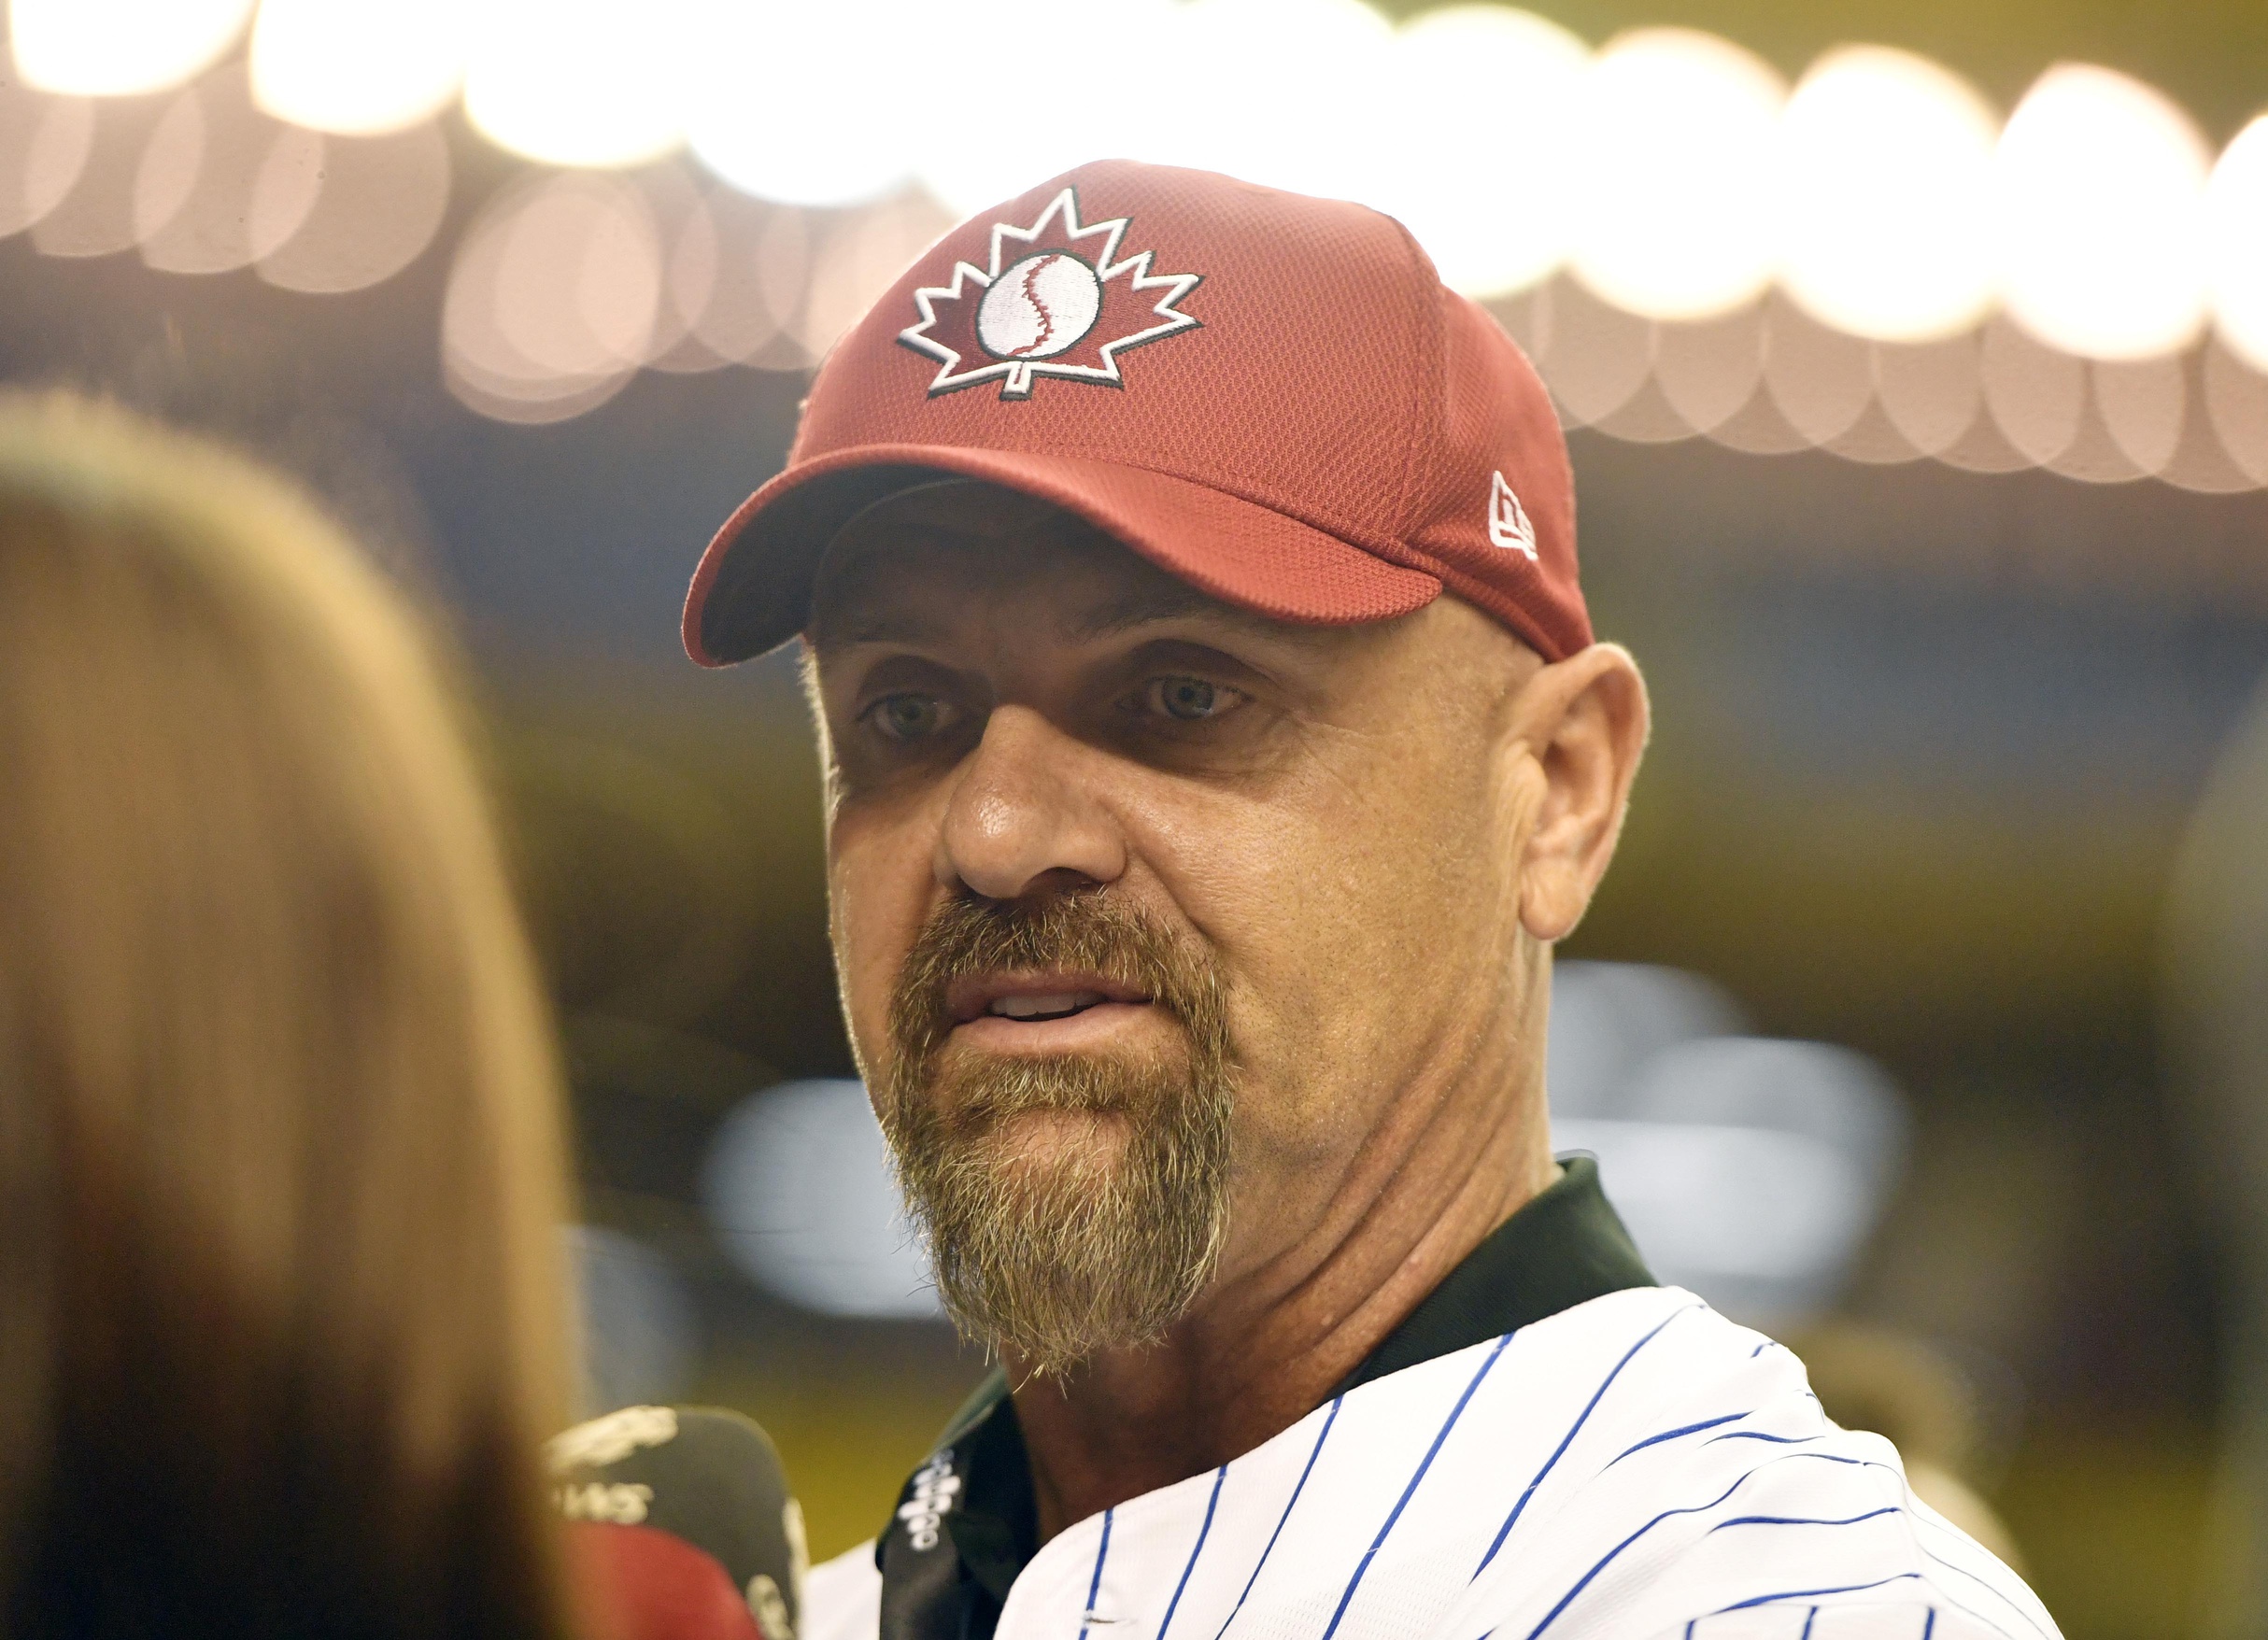 Saunders: Coors Field was not Larry Walker's PED – The Fort Morgan